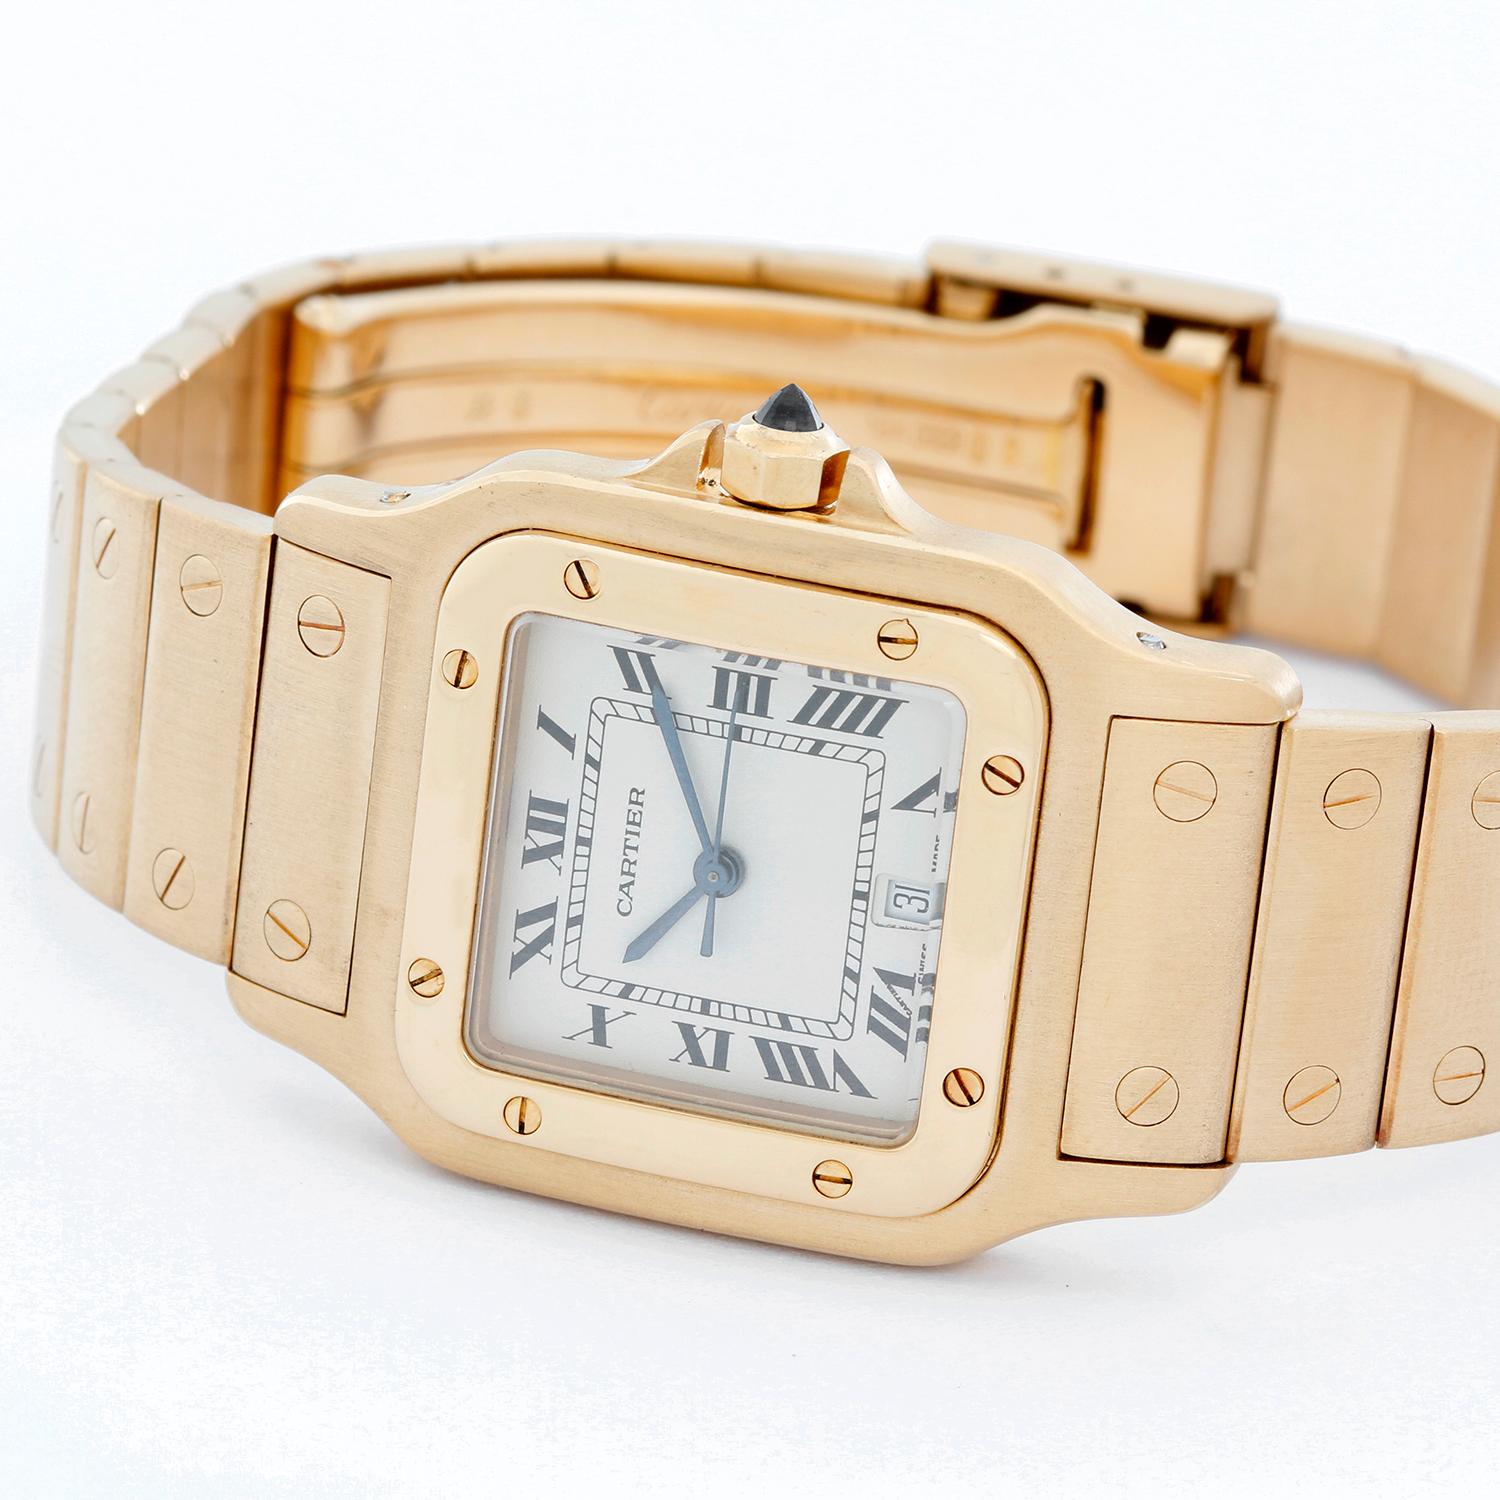 Cartier Santos Galbee 18K Yellow Gold Quartz Watch W20010C5 - Quartz. Yellow Gold case (29mm x 41mm). White dial with black Roman numerals; date at 6 o'clock. 18K Yellow Gold Santos bracelet. Pre-owned Cartier box and papers. Warranty papers dated